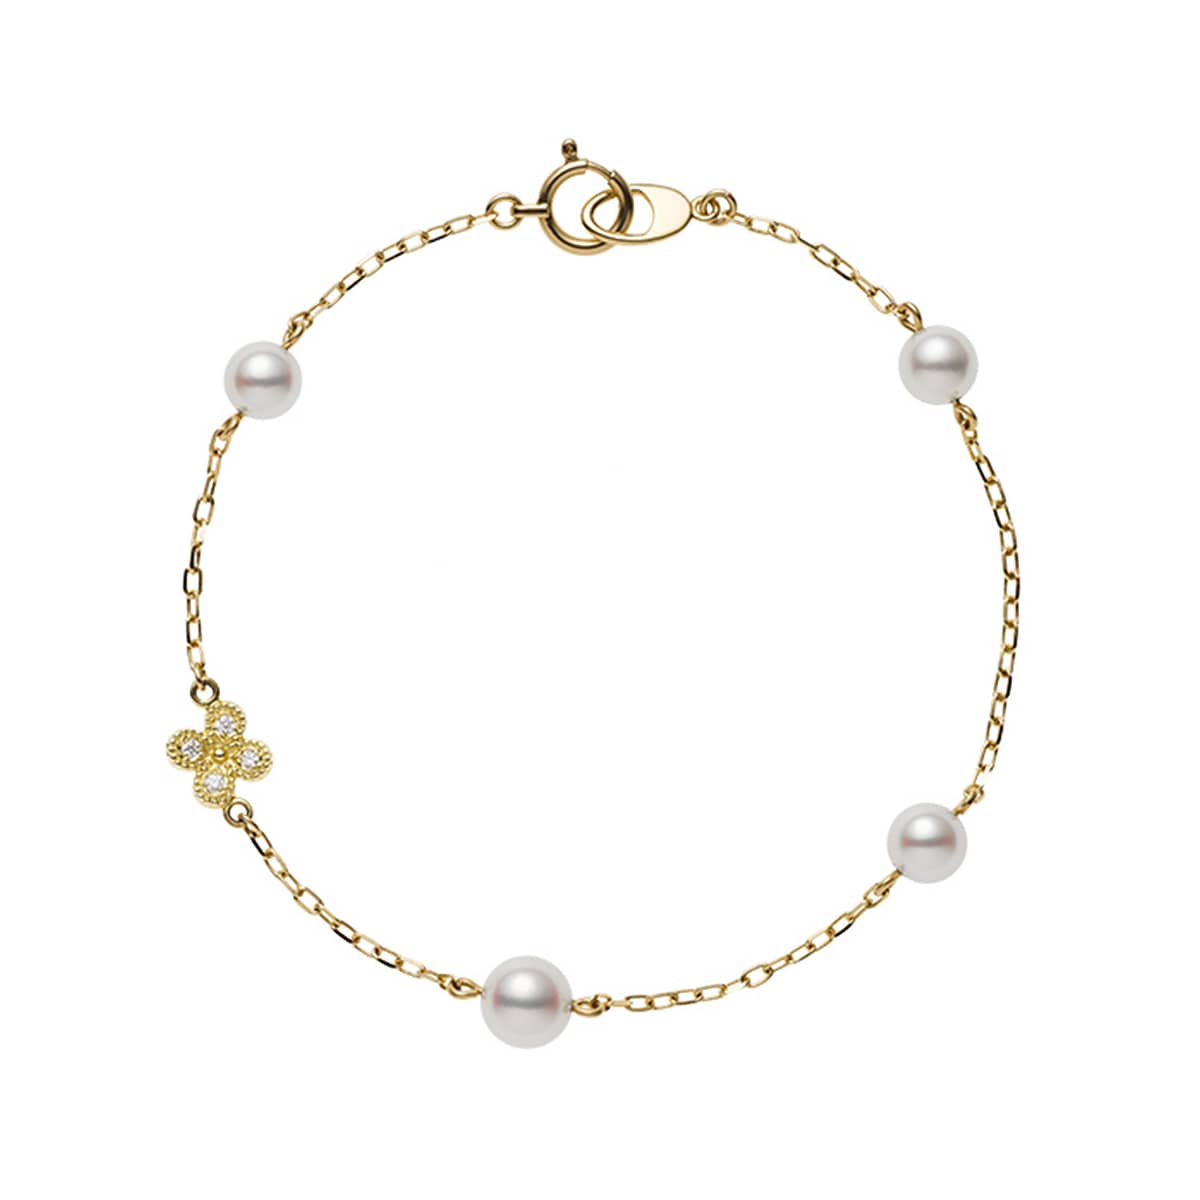 Mikimoto 18k Yellow Gold and Flower Pearl Bracelet